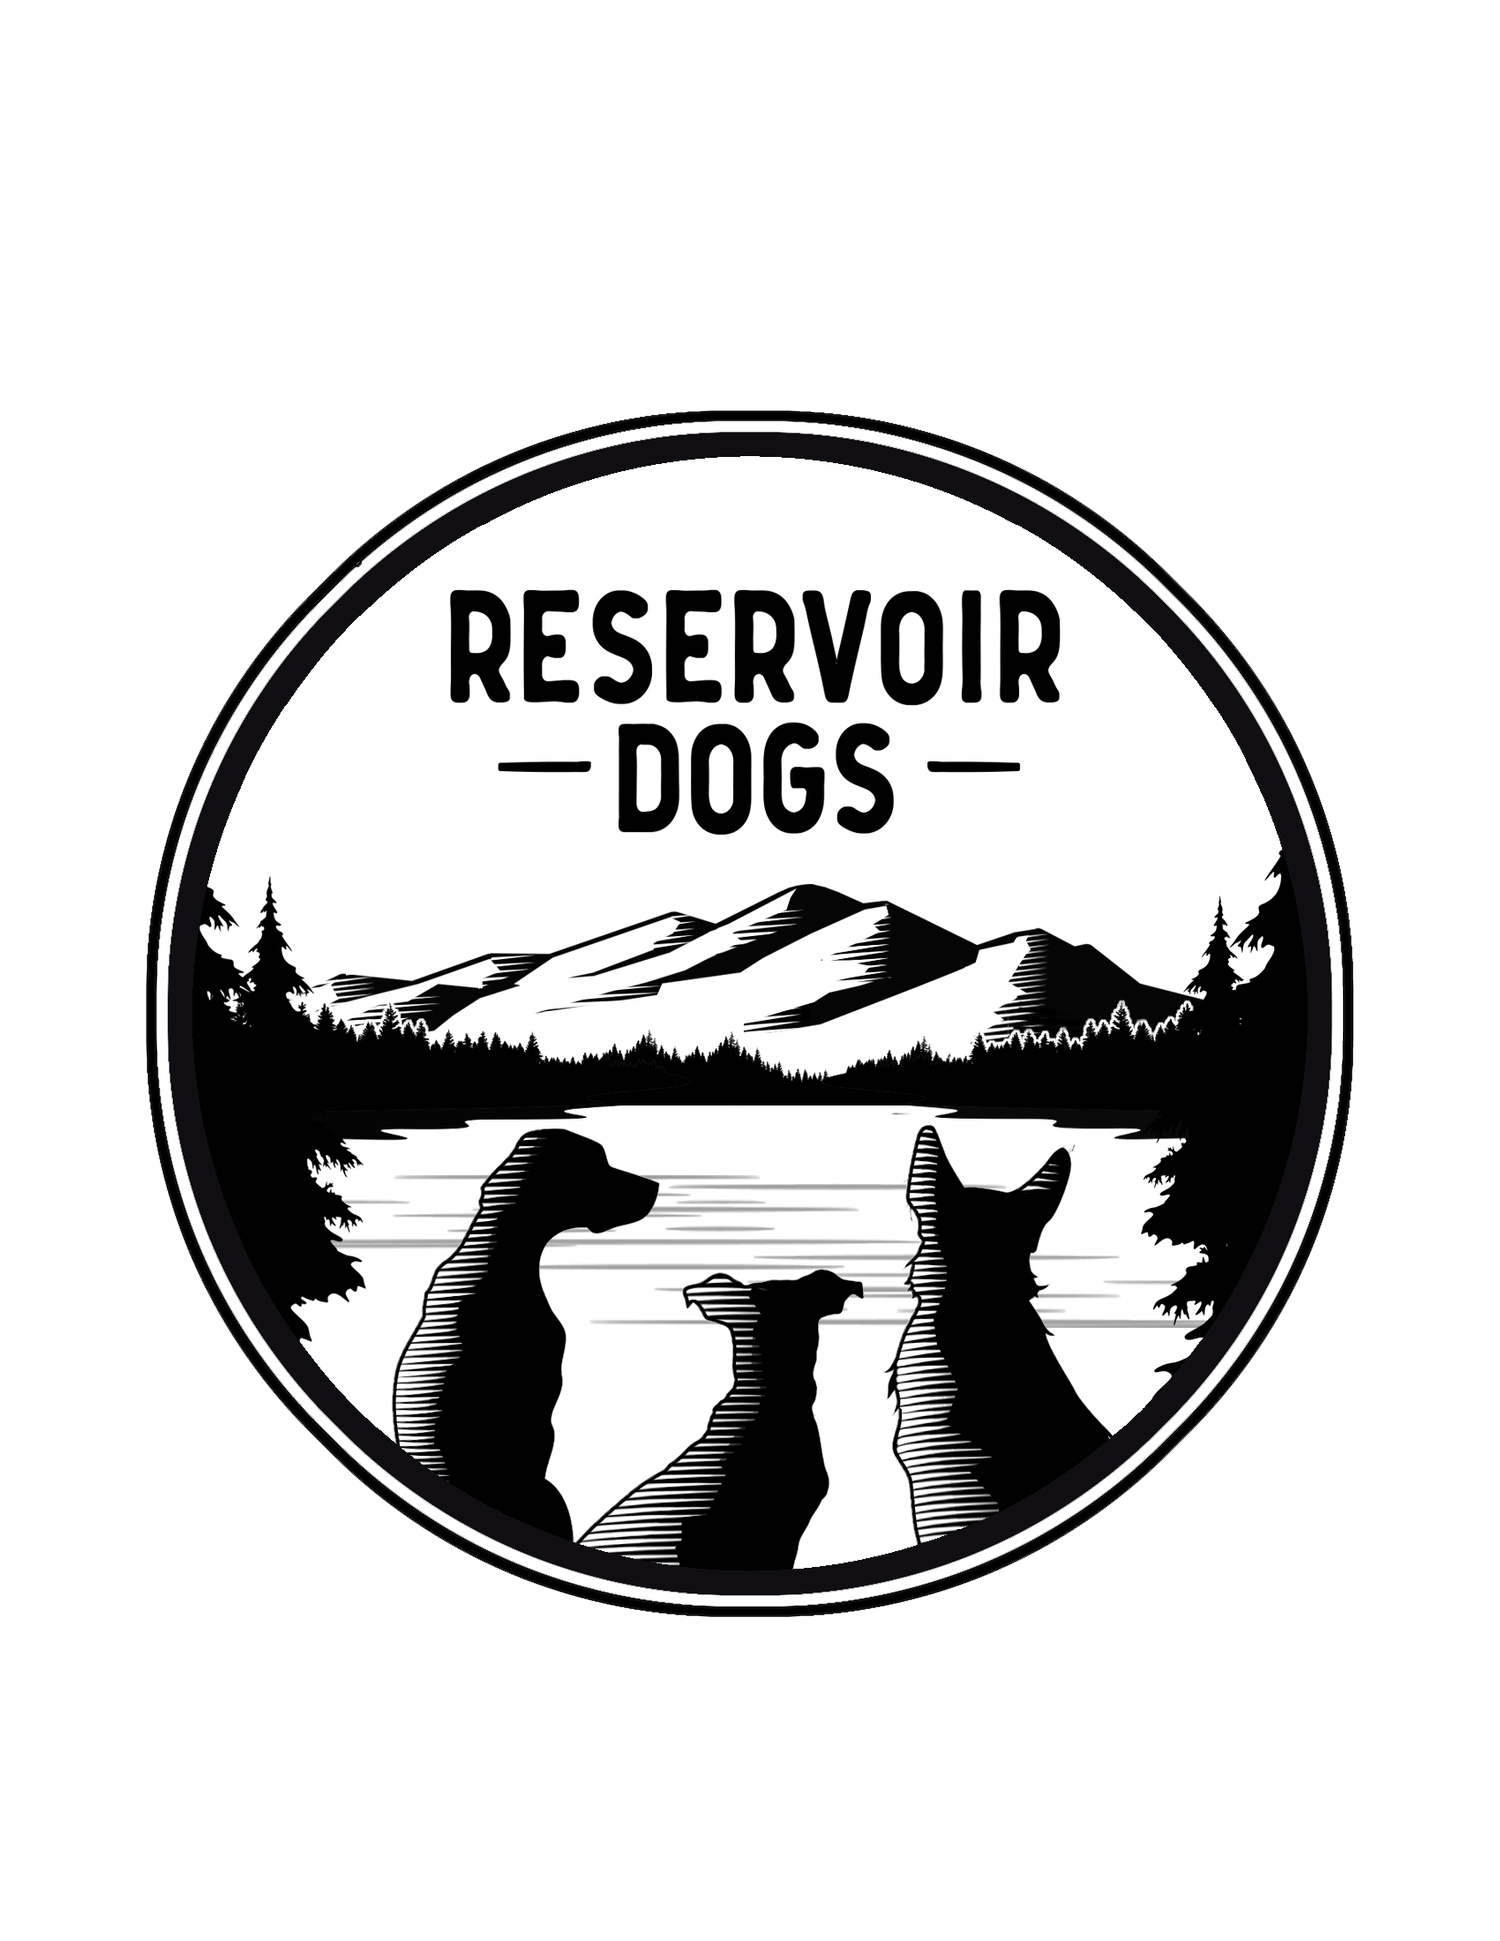 RESERVOIR DOGS: Canine Hiking Excursions + Pet Sitting